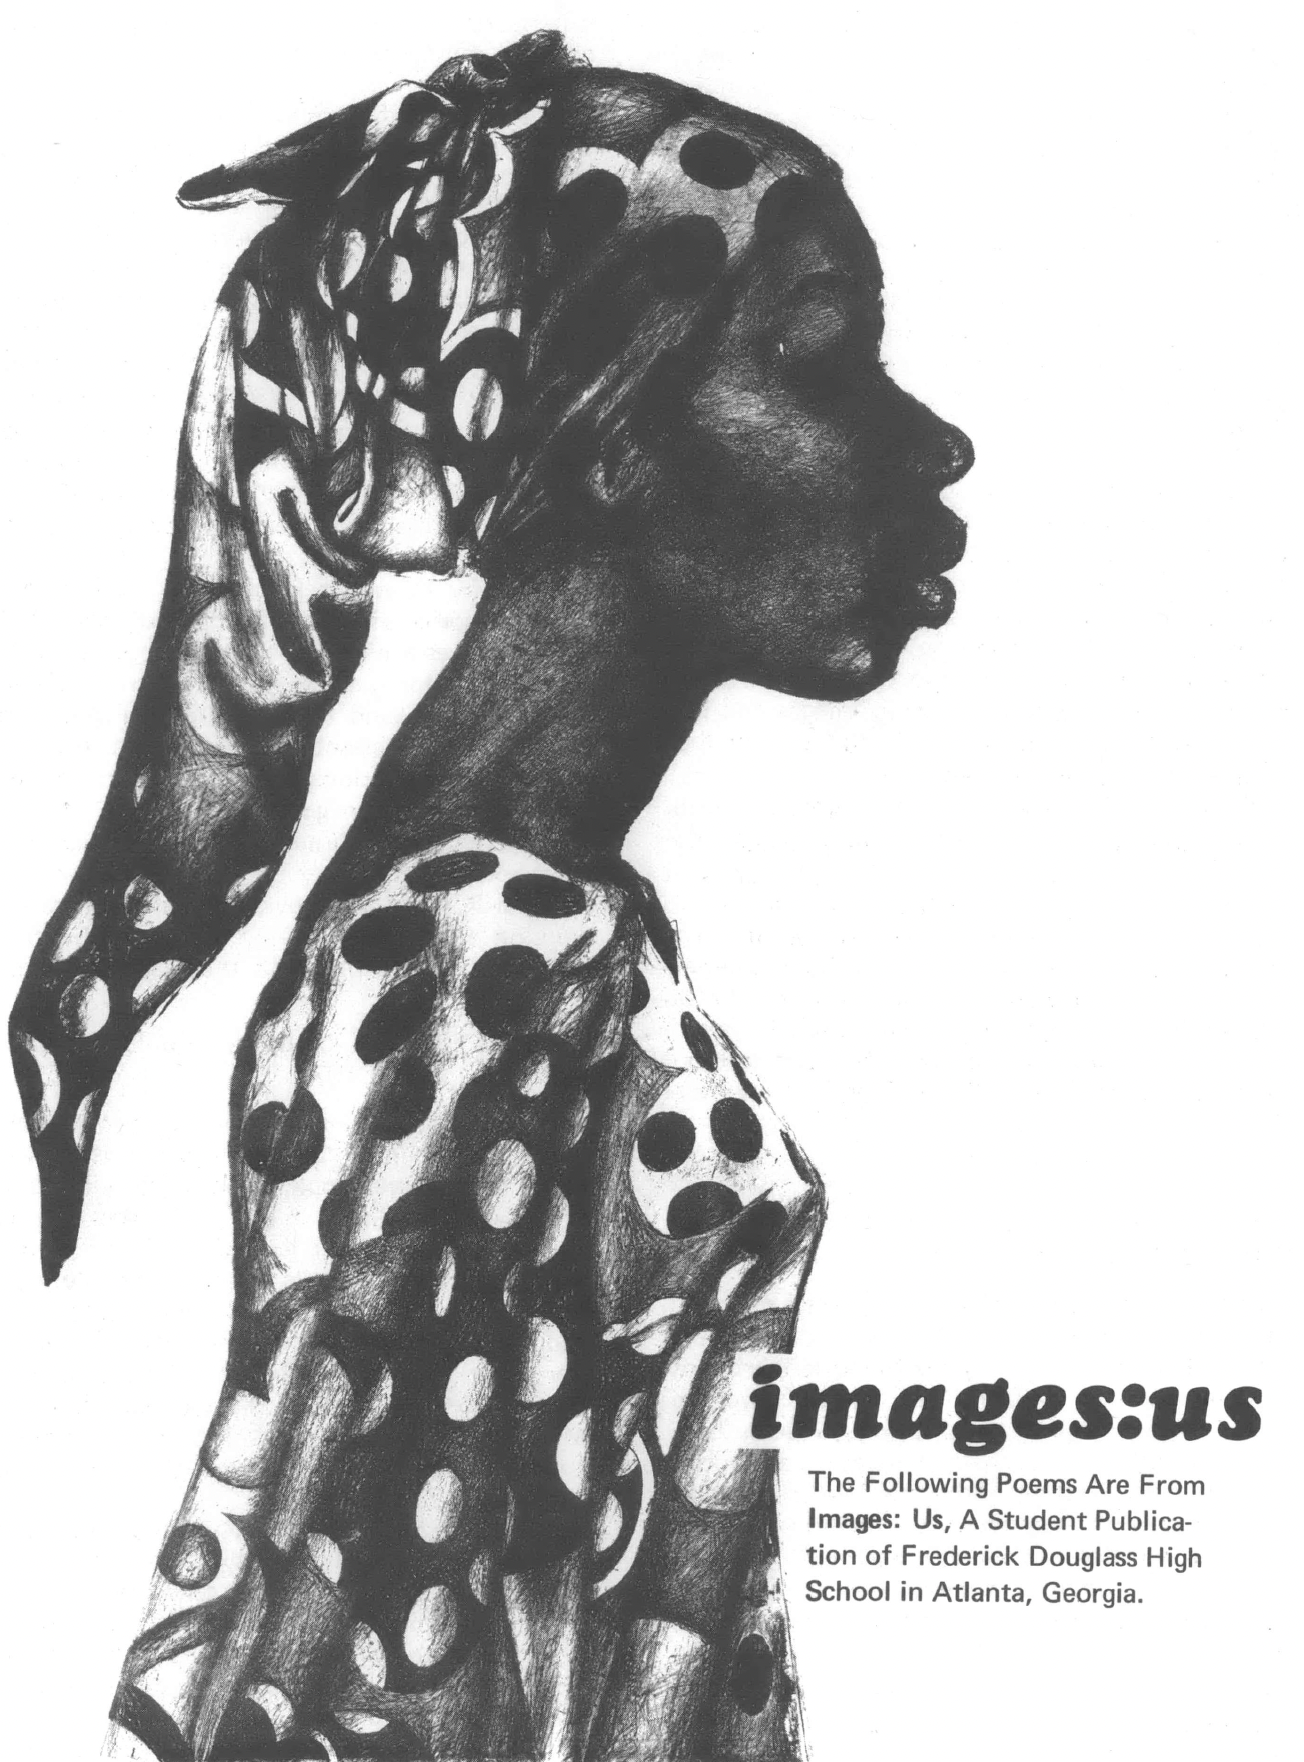 Profile of a young Black woman wearing a polka dot dress and head wrap